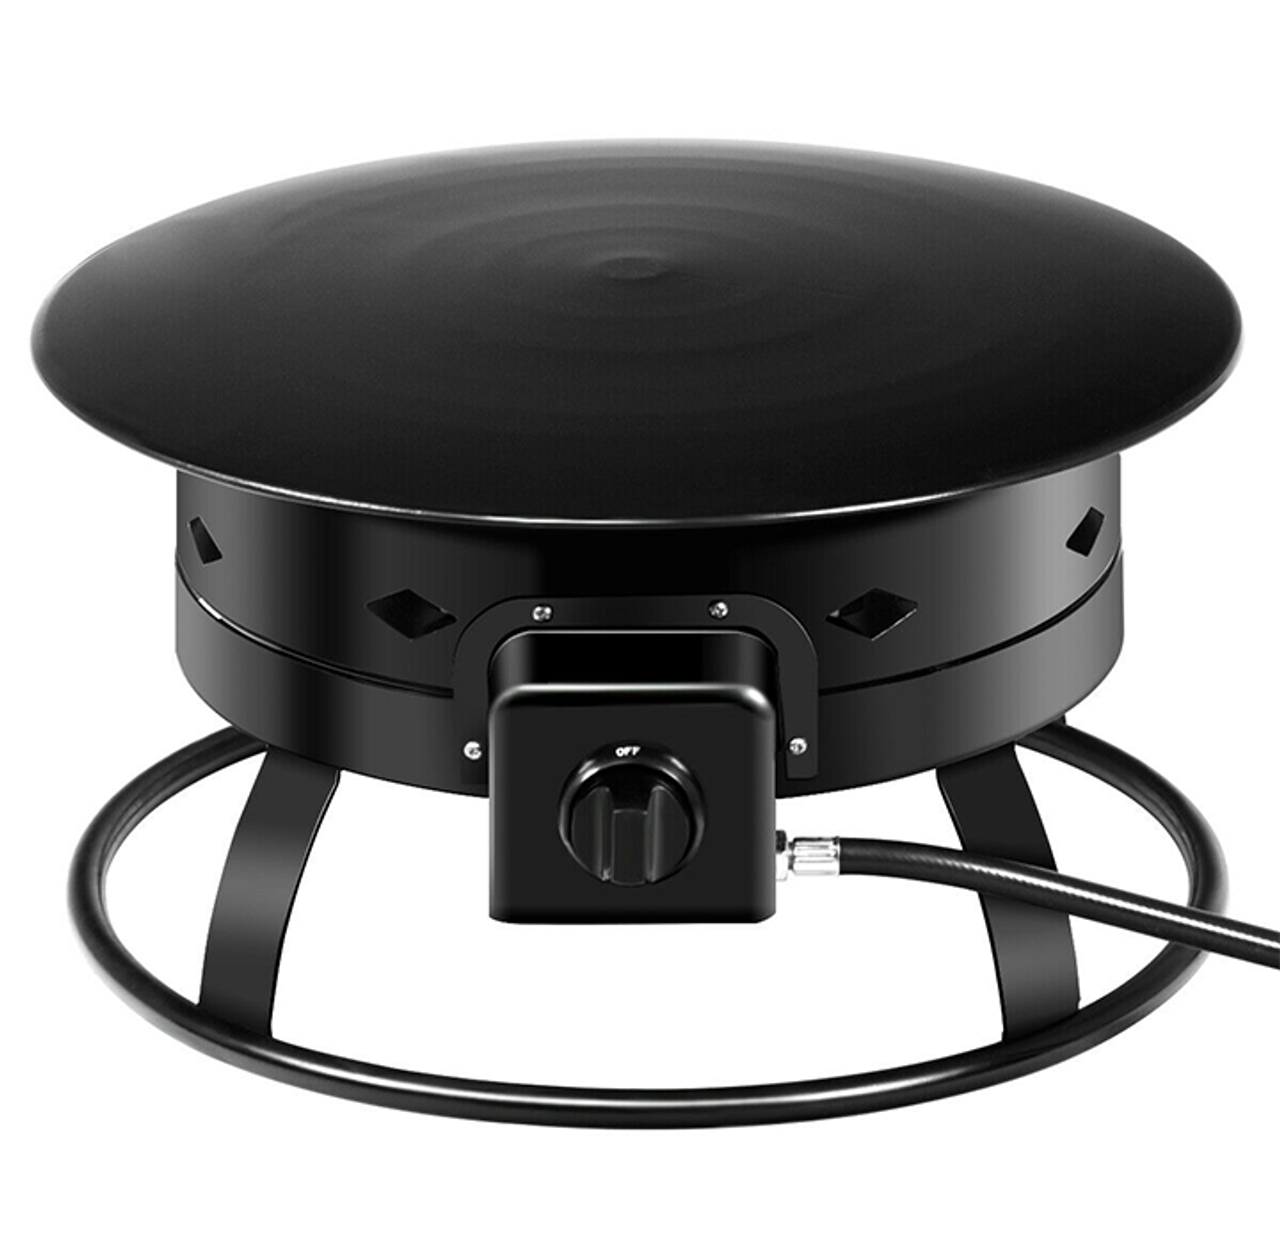 Portable 58,000 BTU Outdoor Propane Fire Pit product image